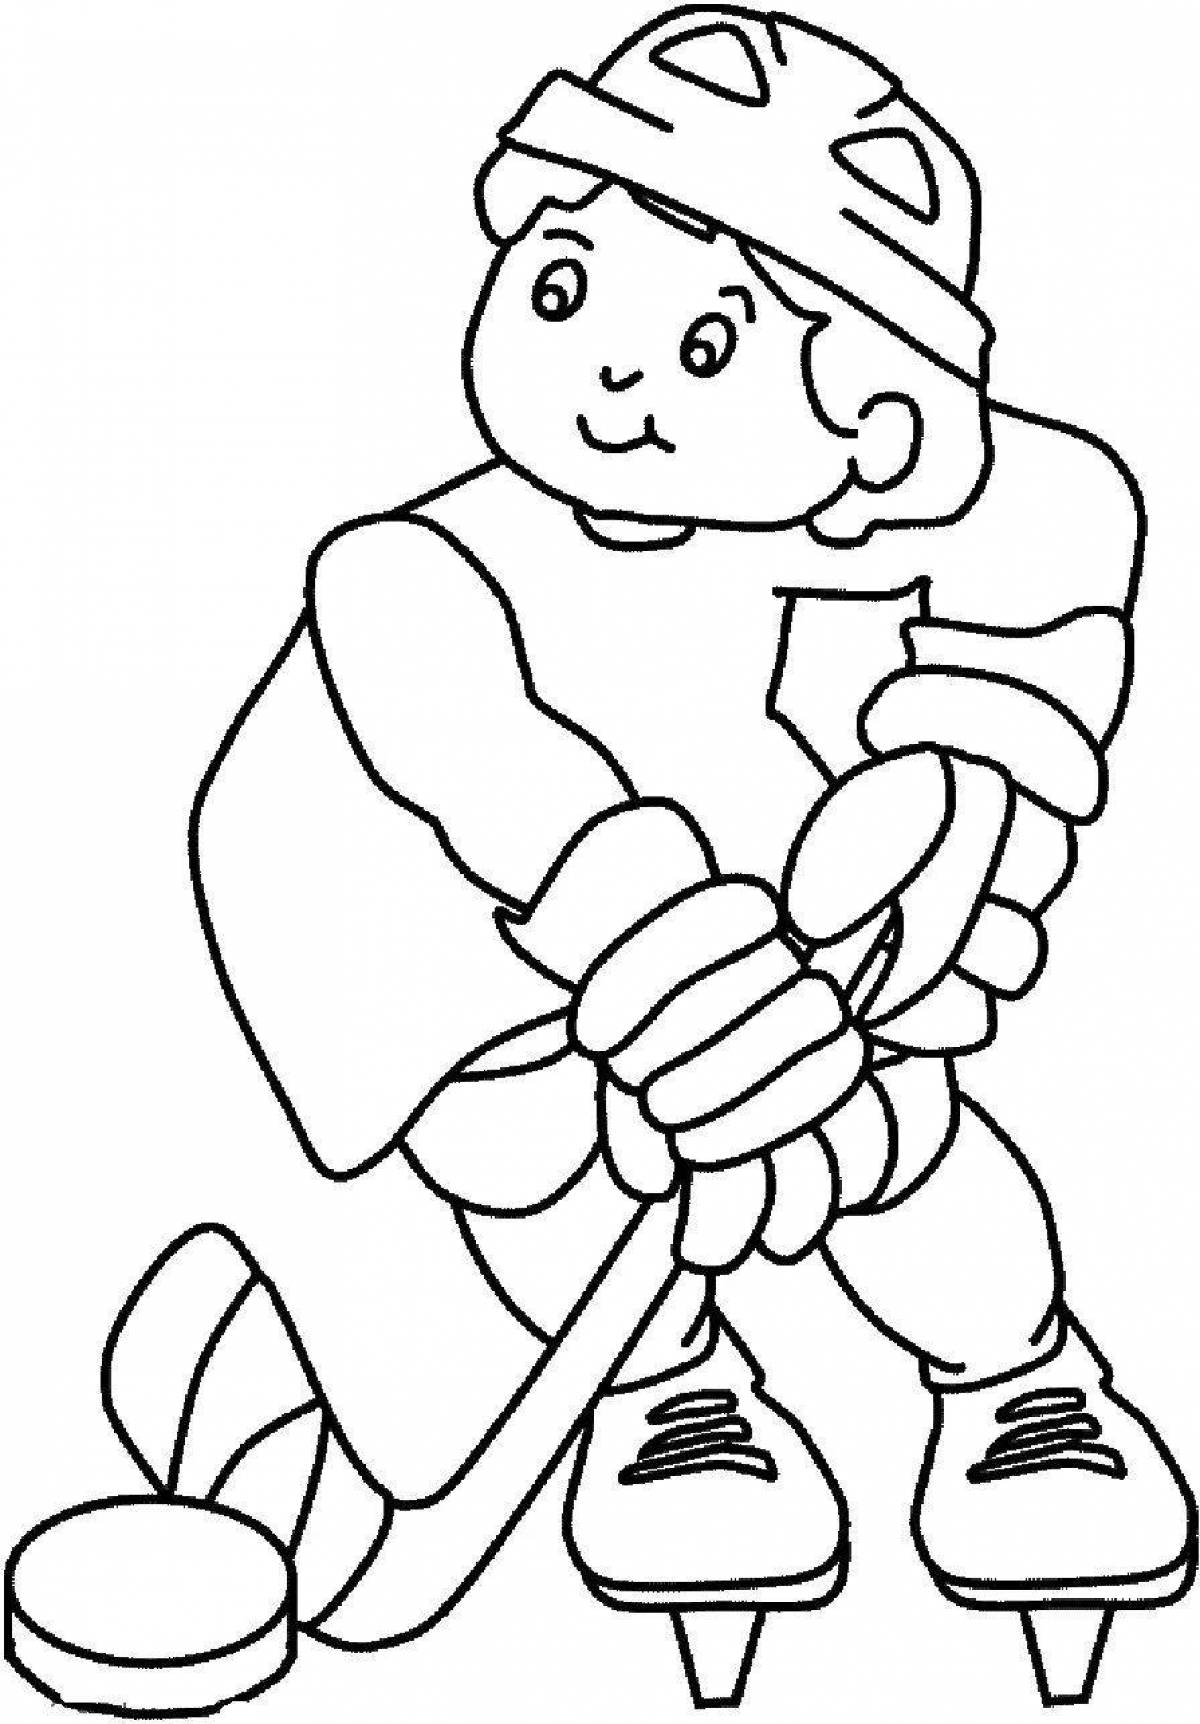 Animated coloring book winter sports for preschoolers